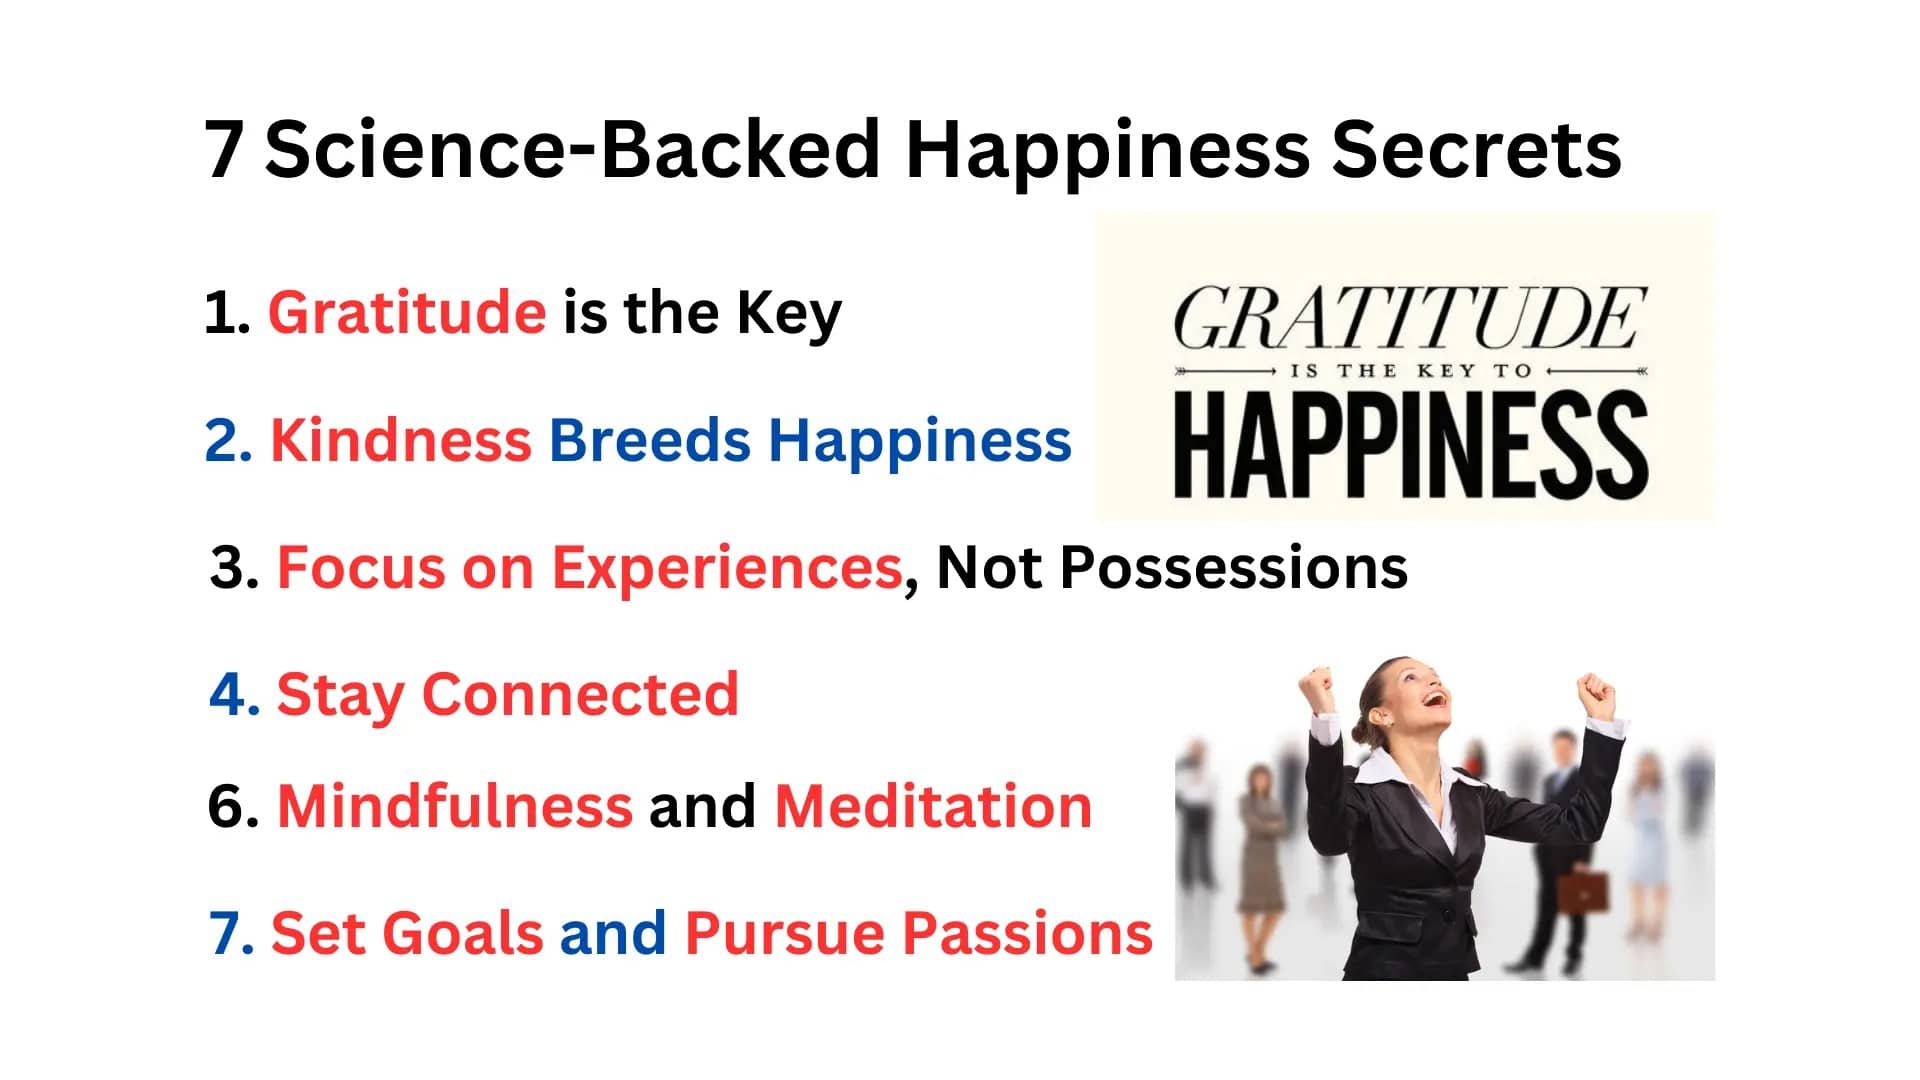 7 Science-Backed Happiness Secrets